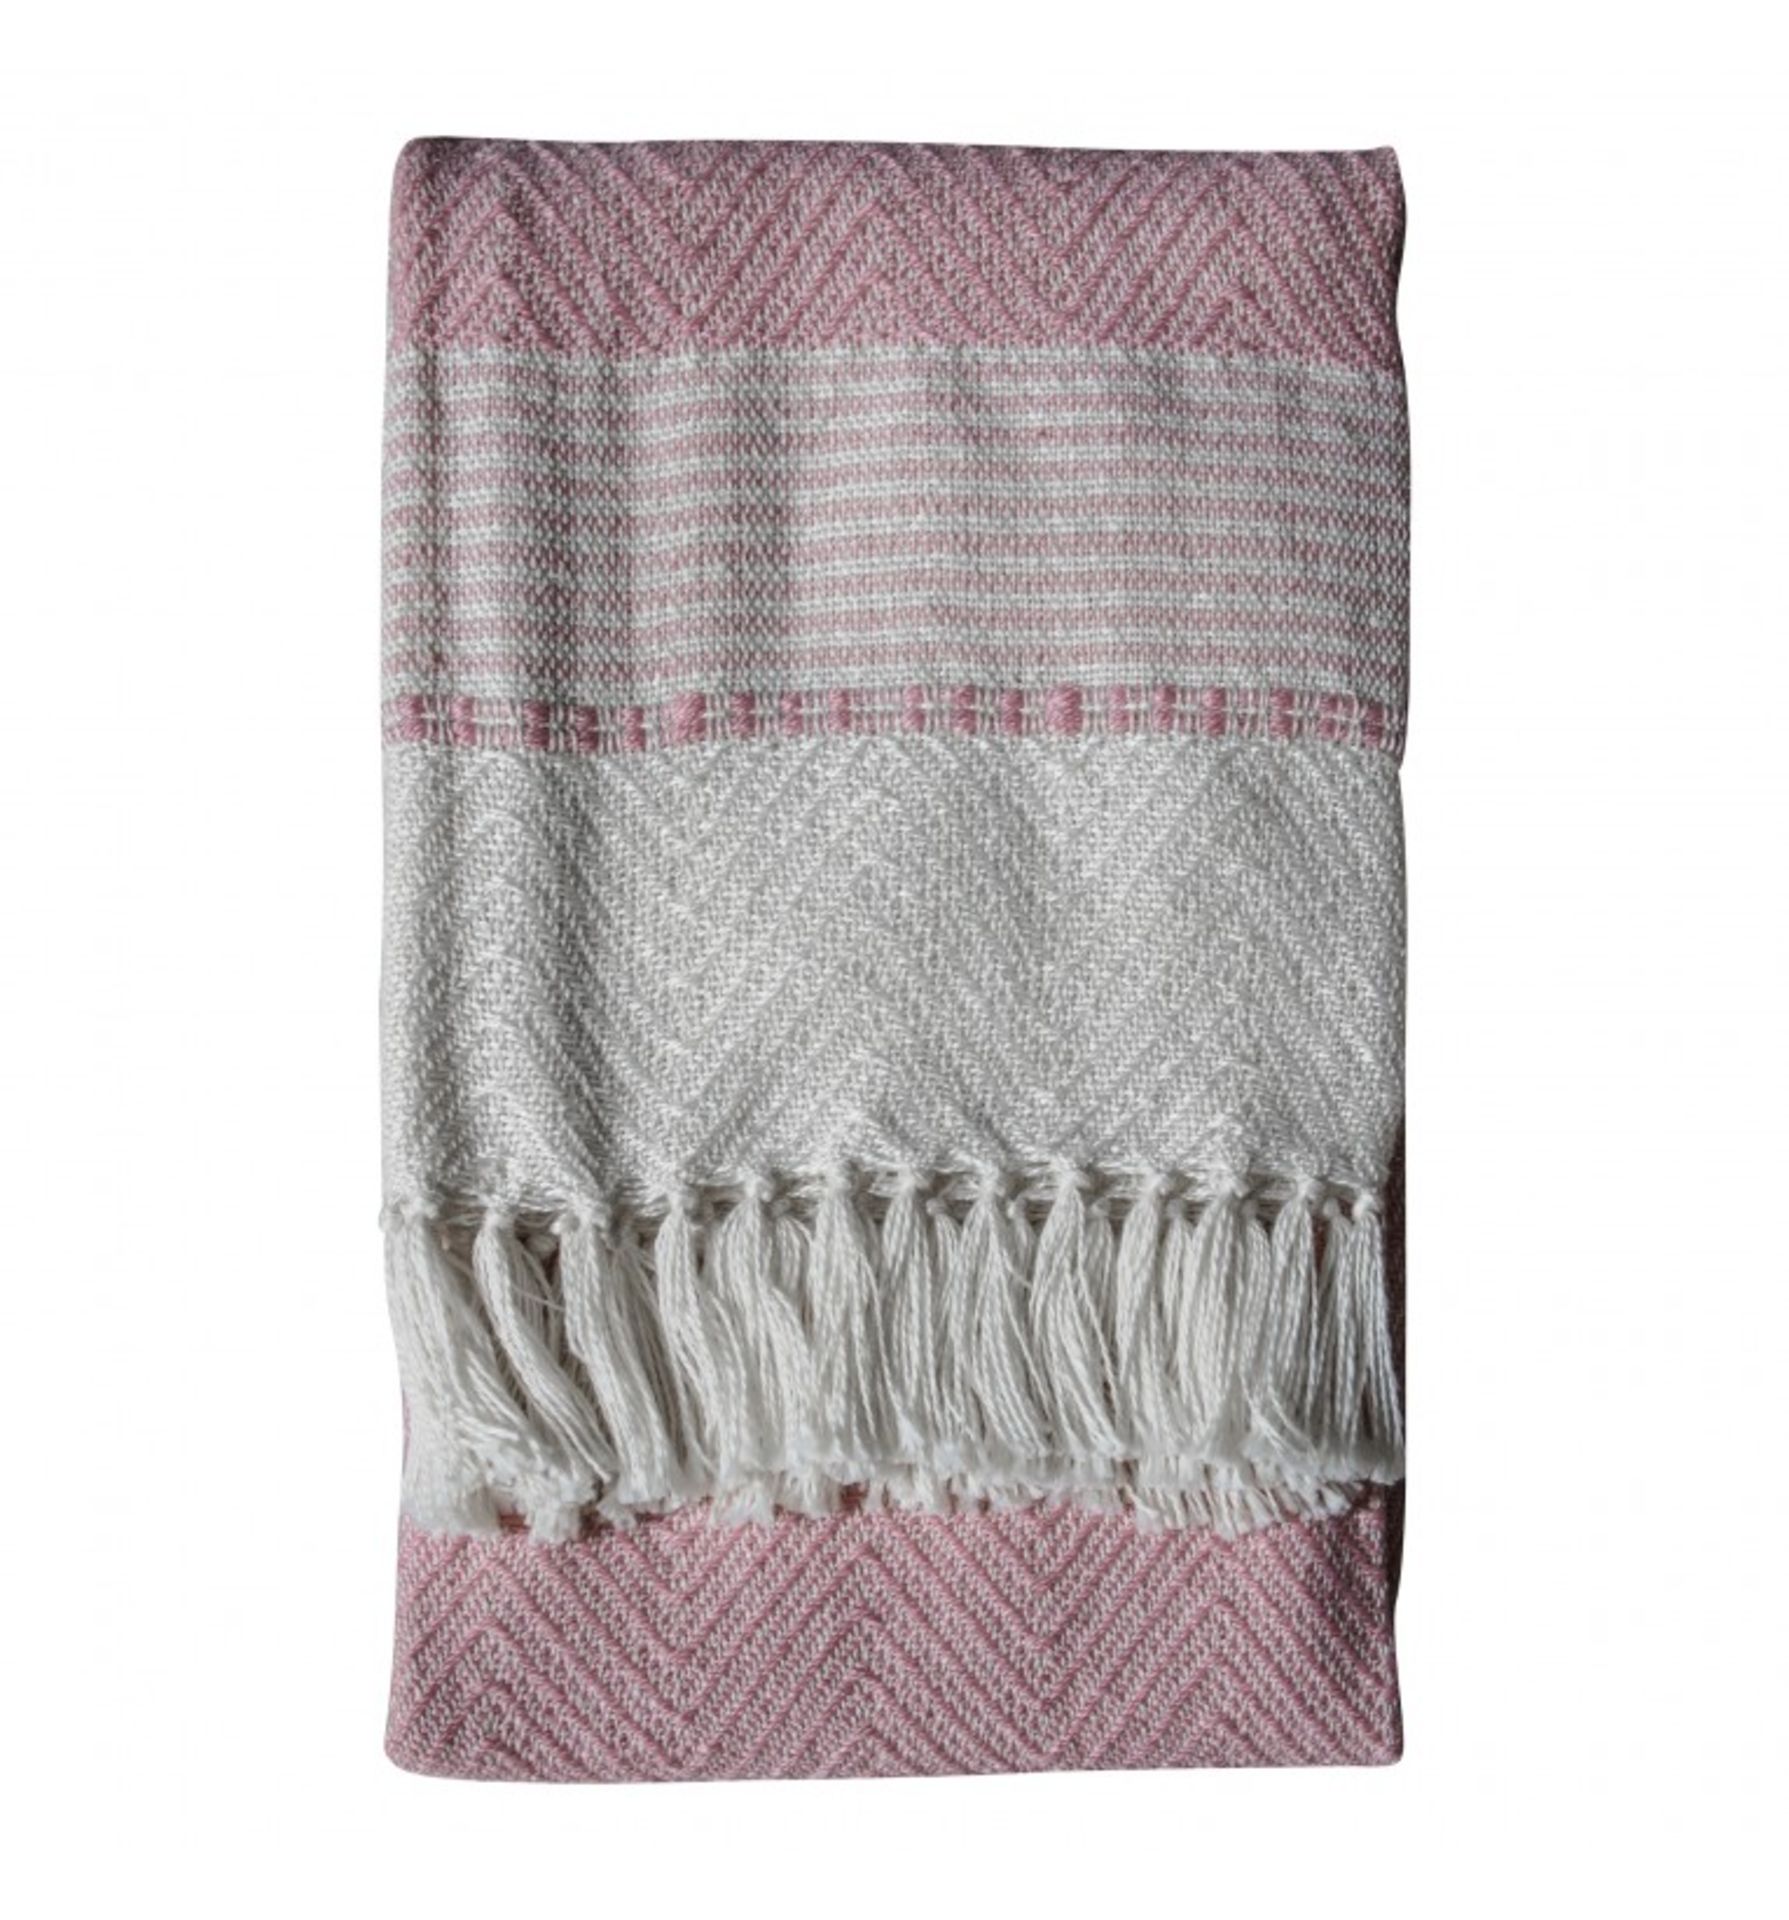 Chevron Throw Blush Simply Green 100% Recycled Throws And Cushions Are Hand Woven Using Recycled